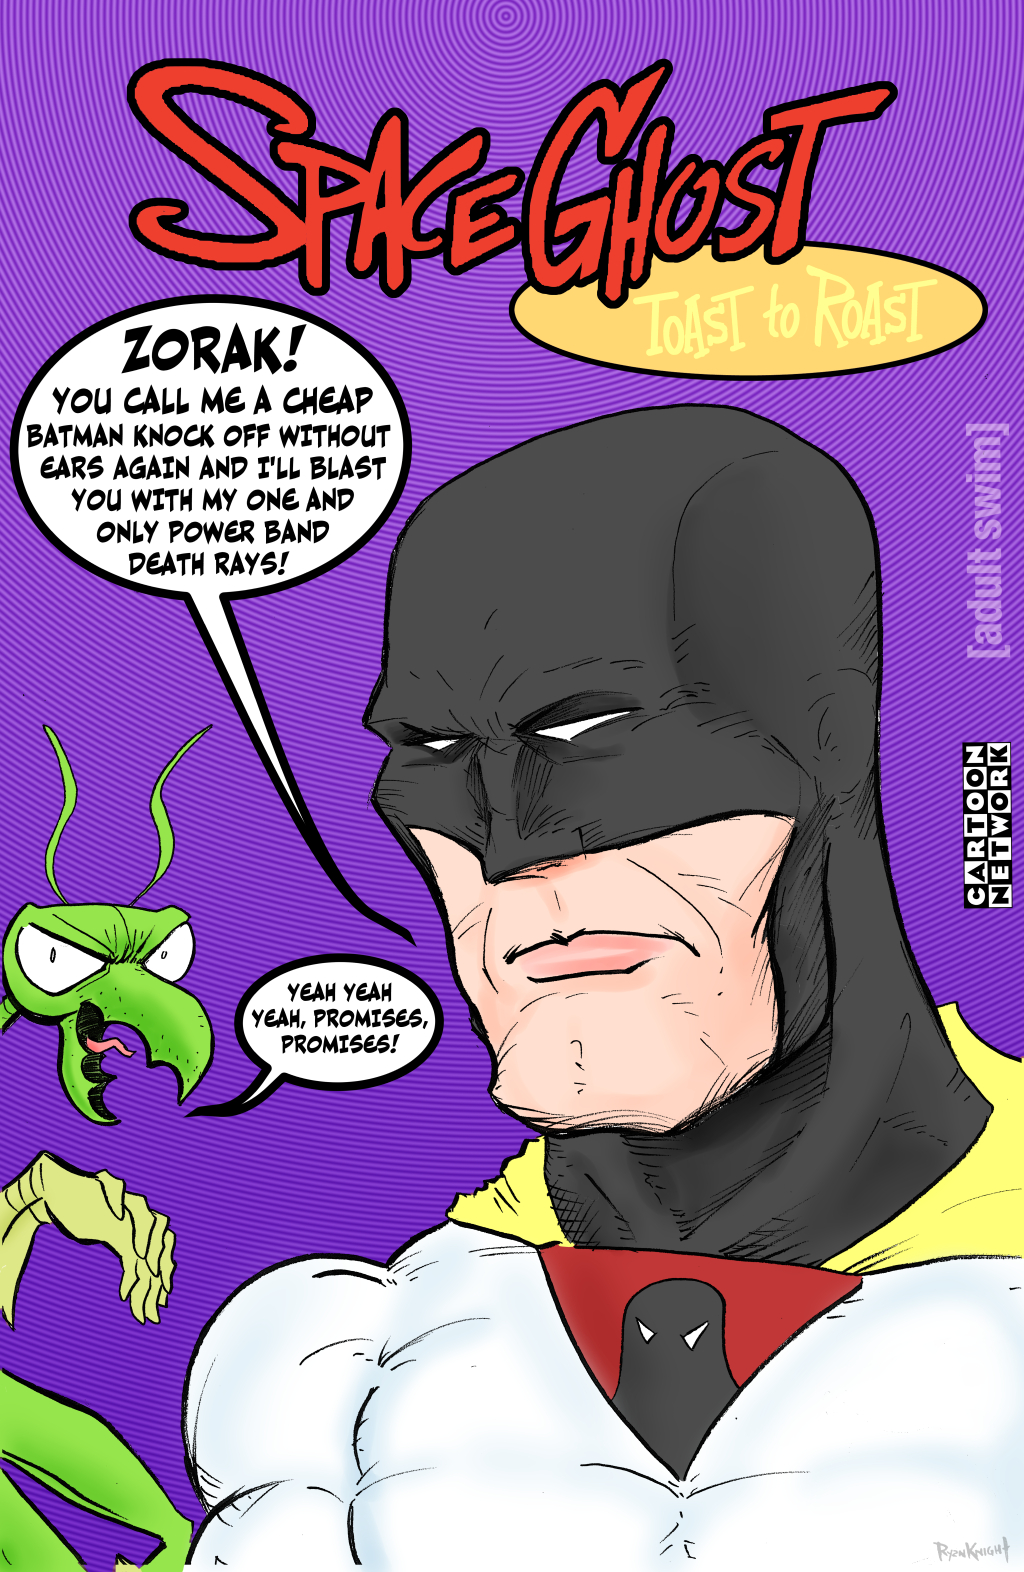 Space Ghost Toast to Roast